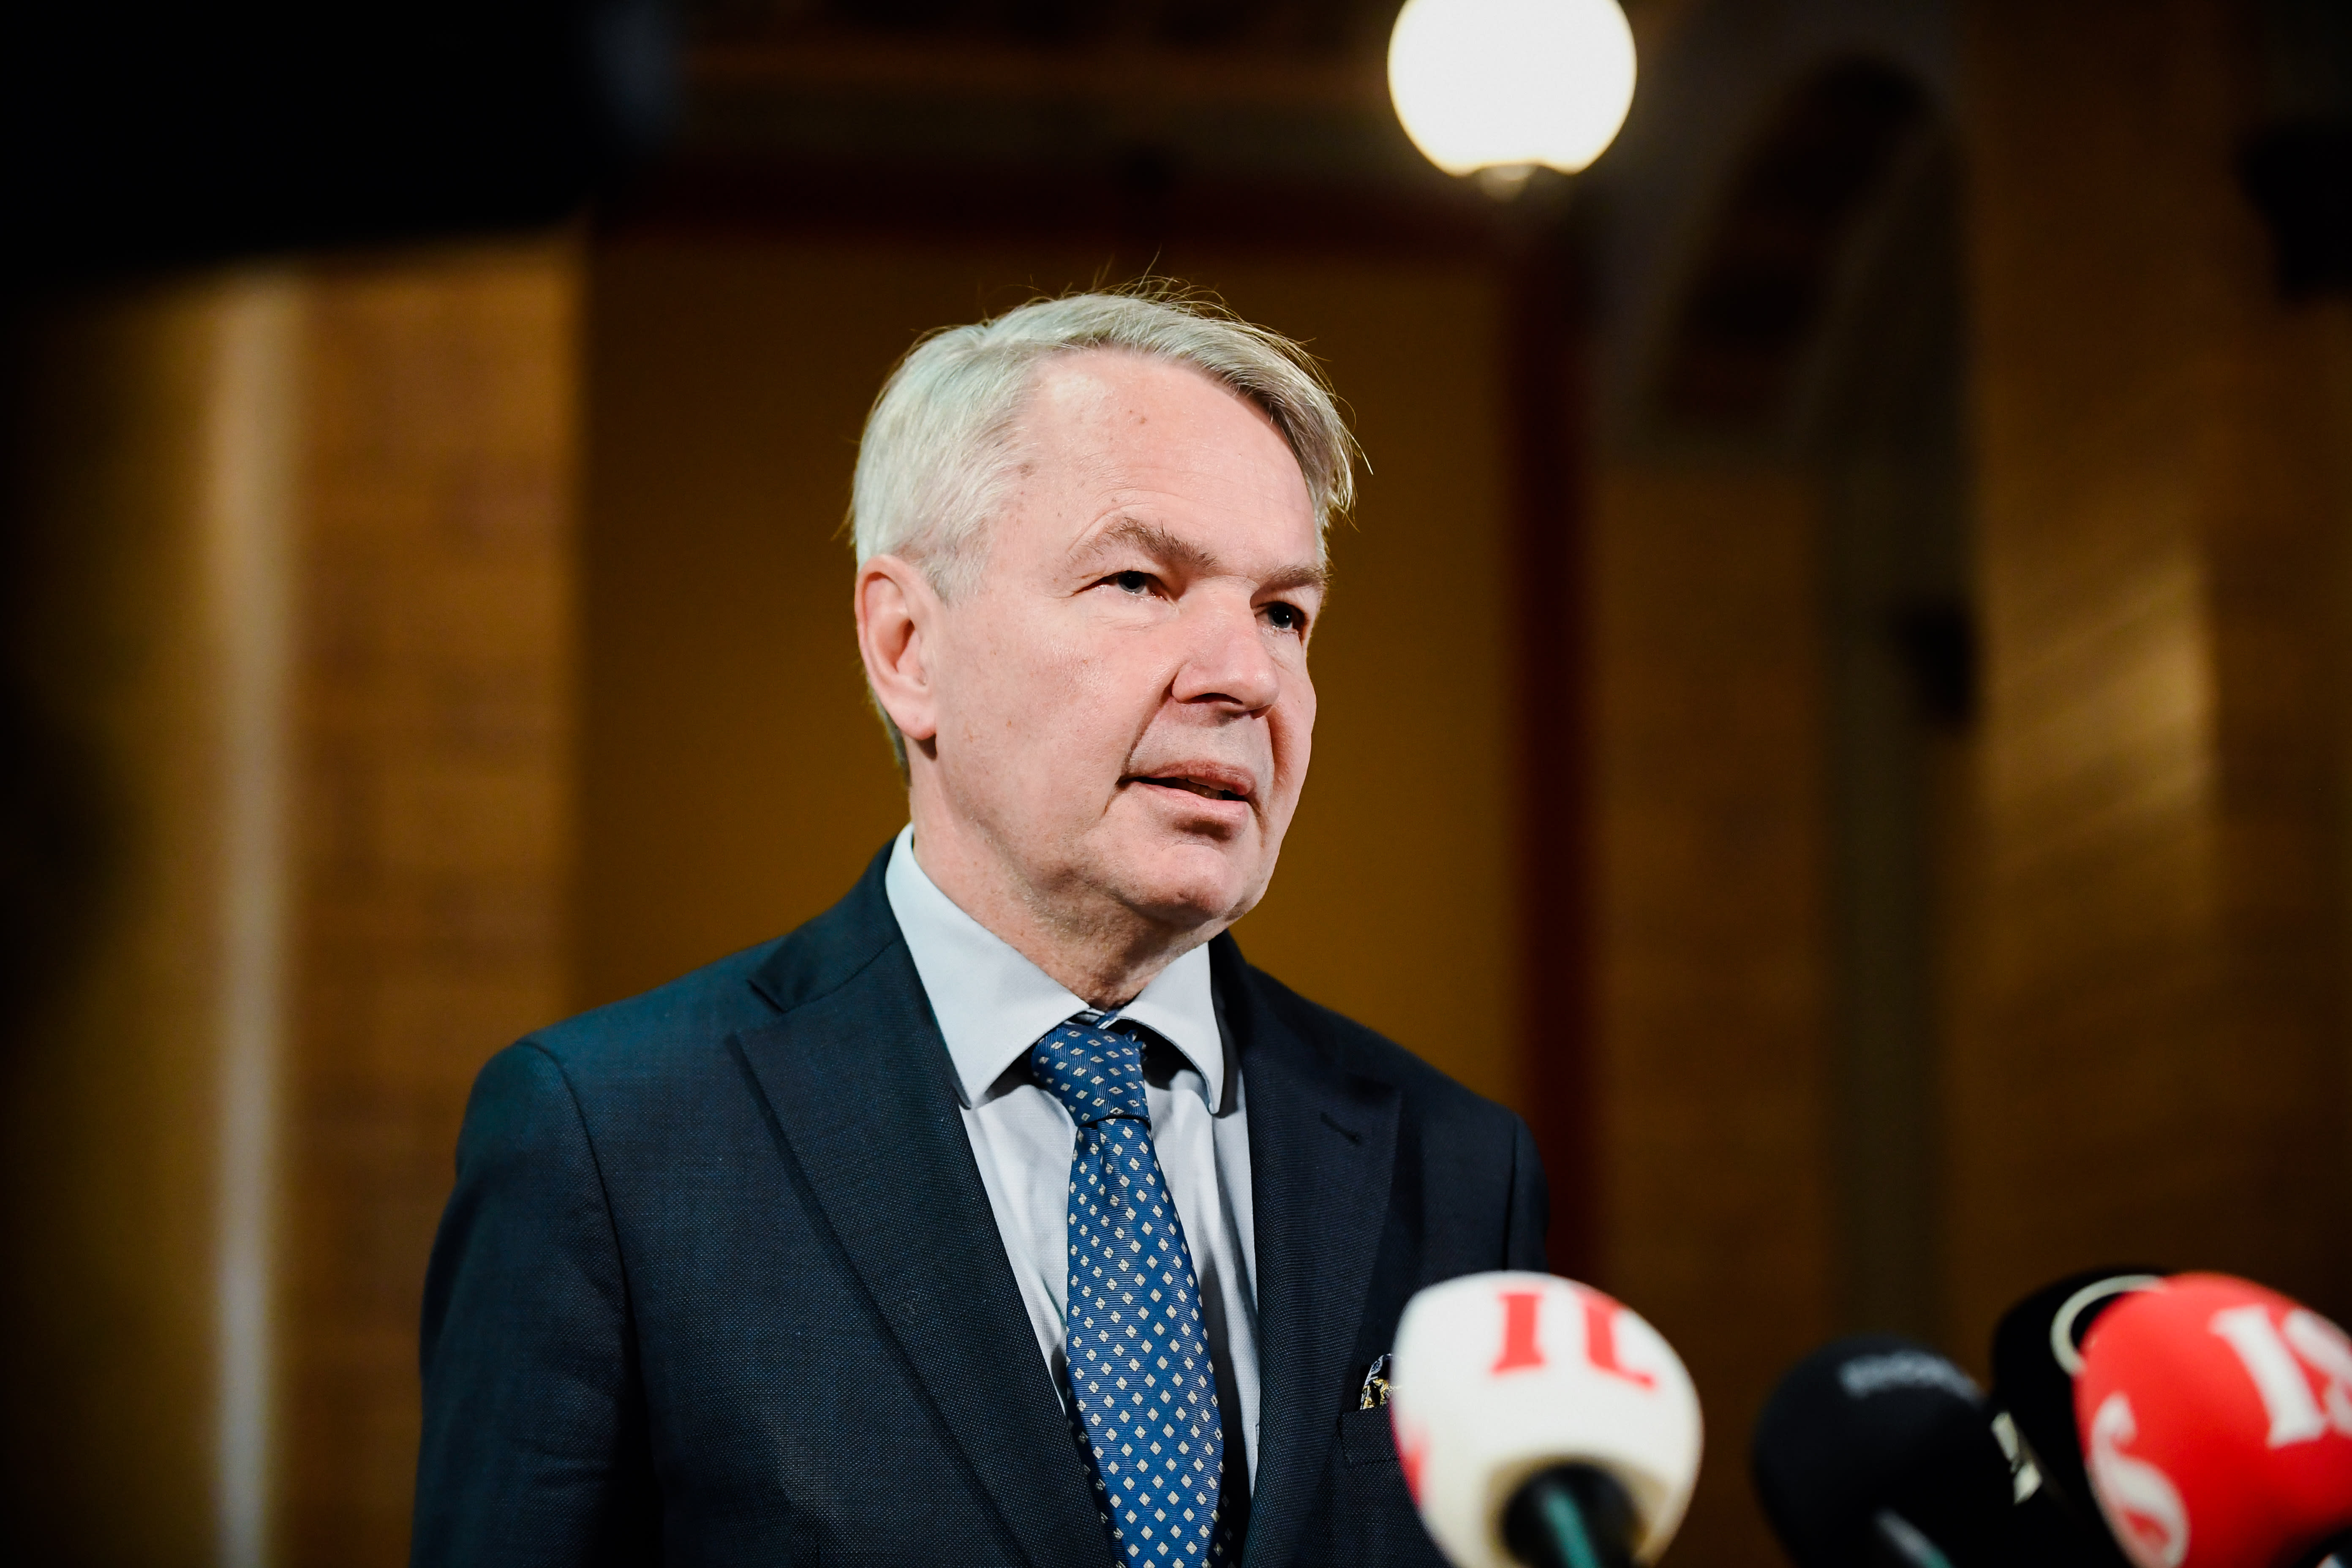 Haavisto: The possibility that the Nord Stream damage was intentional cannot be ruled out